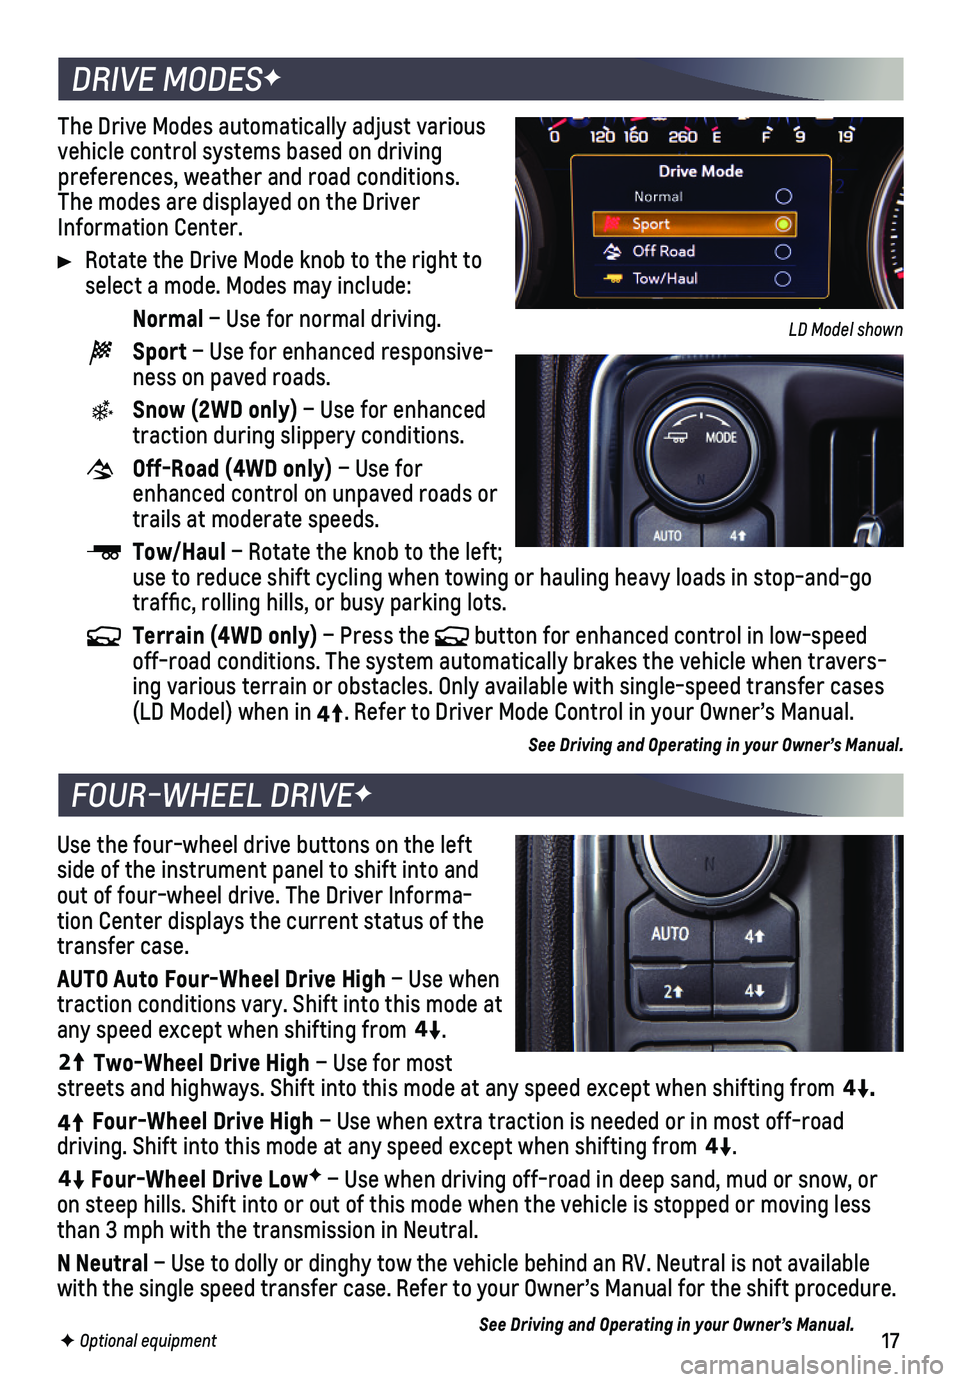 CHEVROLET SILVERADO 2020  Get To Know Guide 17F Optional equipment
The Drive Modes automatically adjust  various vehicle control systems based on driving preferences, weather and road conditions. The modes are displayed on the Driver Informatio